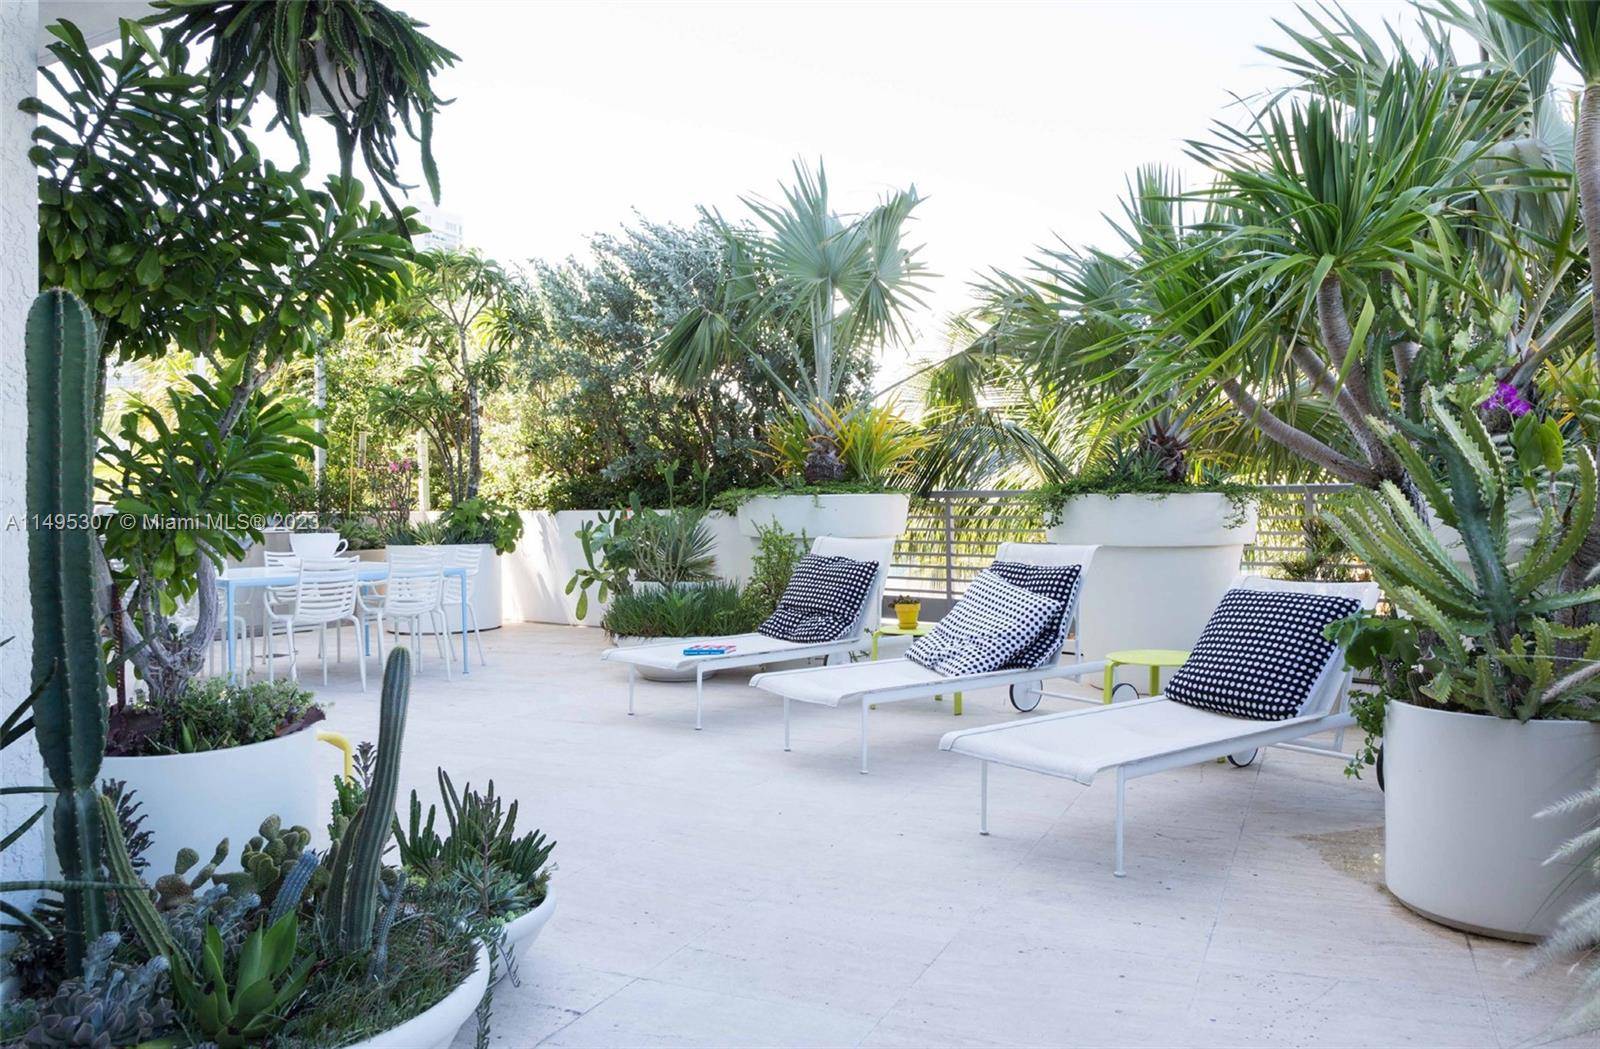 Stunning 2 bed, 2. 5 bath luxury condo with sweeping Biscayne Bay views in Capri South Beach, a luxury boutique building designed by Kobe Karp, residence offers a modern Summer ...